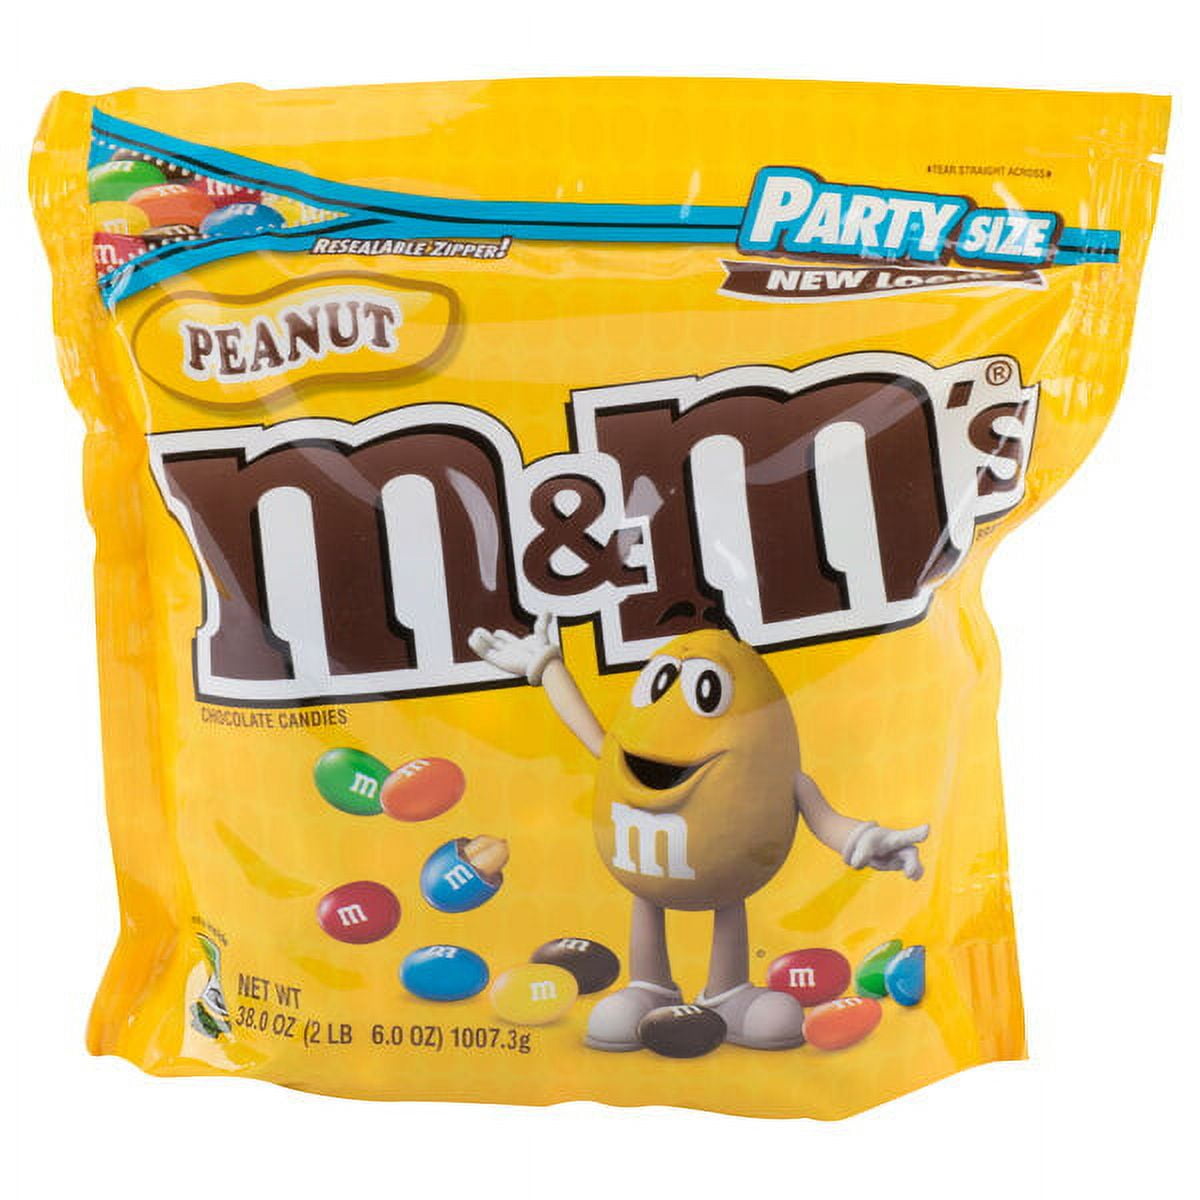 M&M'S RED, WHITE & BLUE PEANUT CHOCOLATE CANDY PARTY SIZE 42-OUNCE BAG -  GTIN/EAN/UPC 40000508694 - Product Details - Cosmos